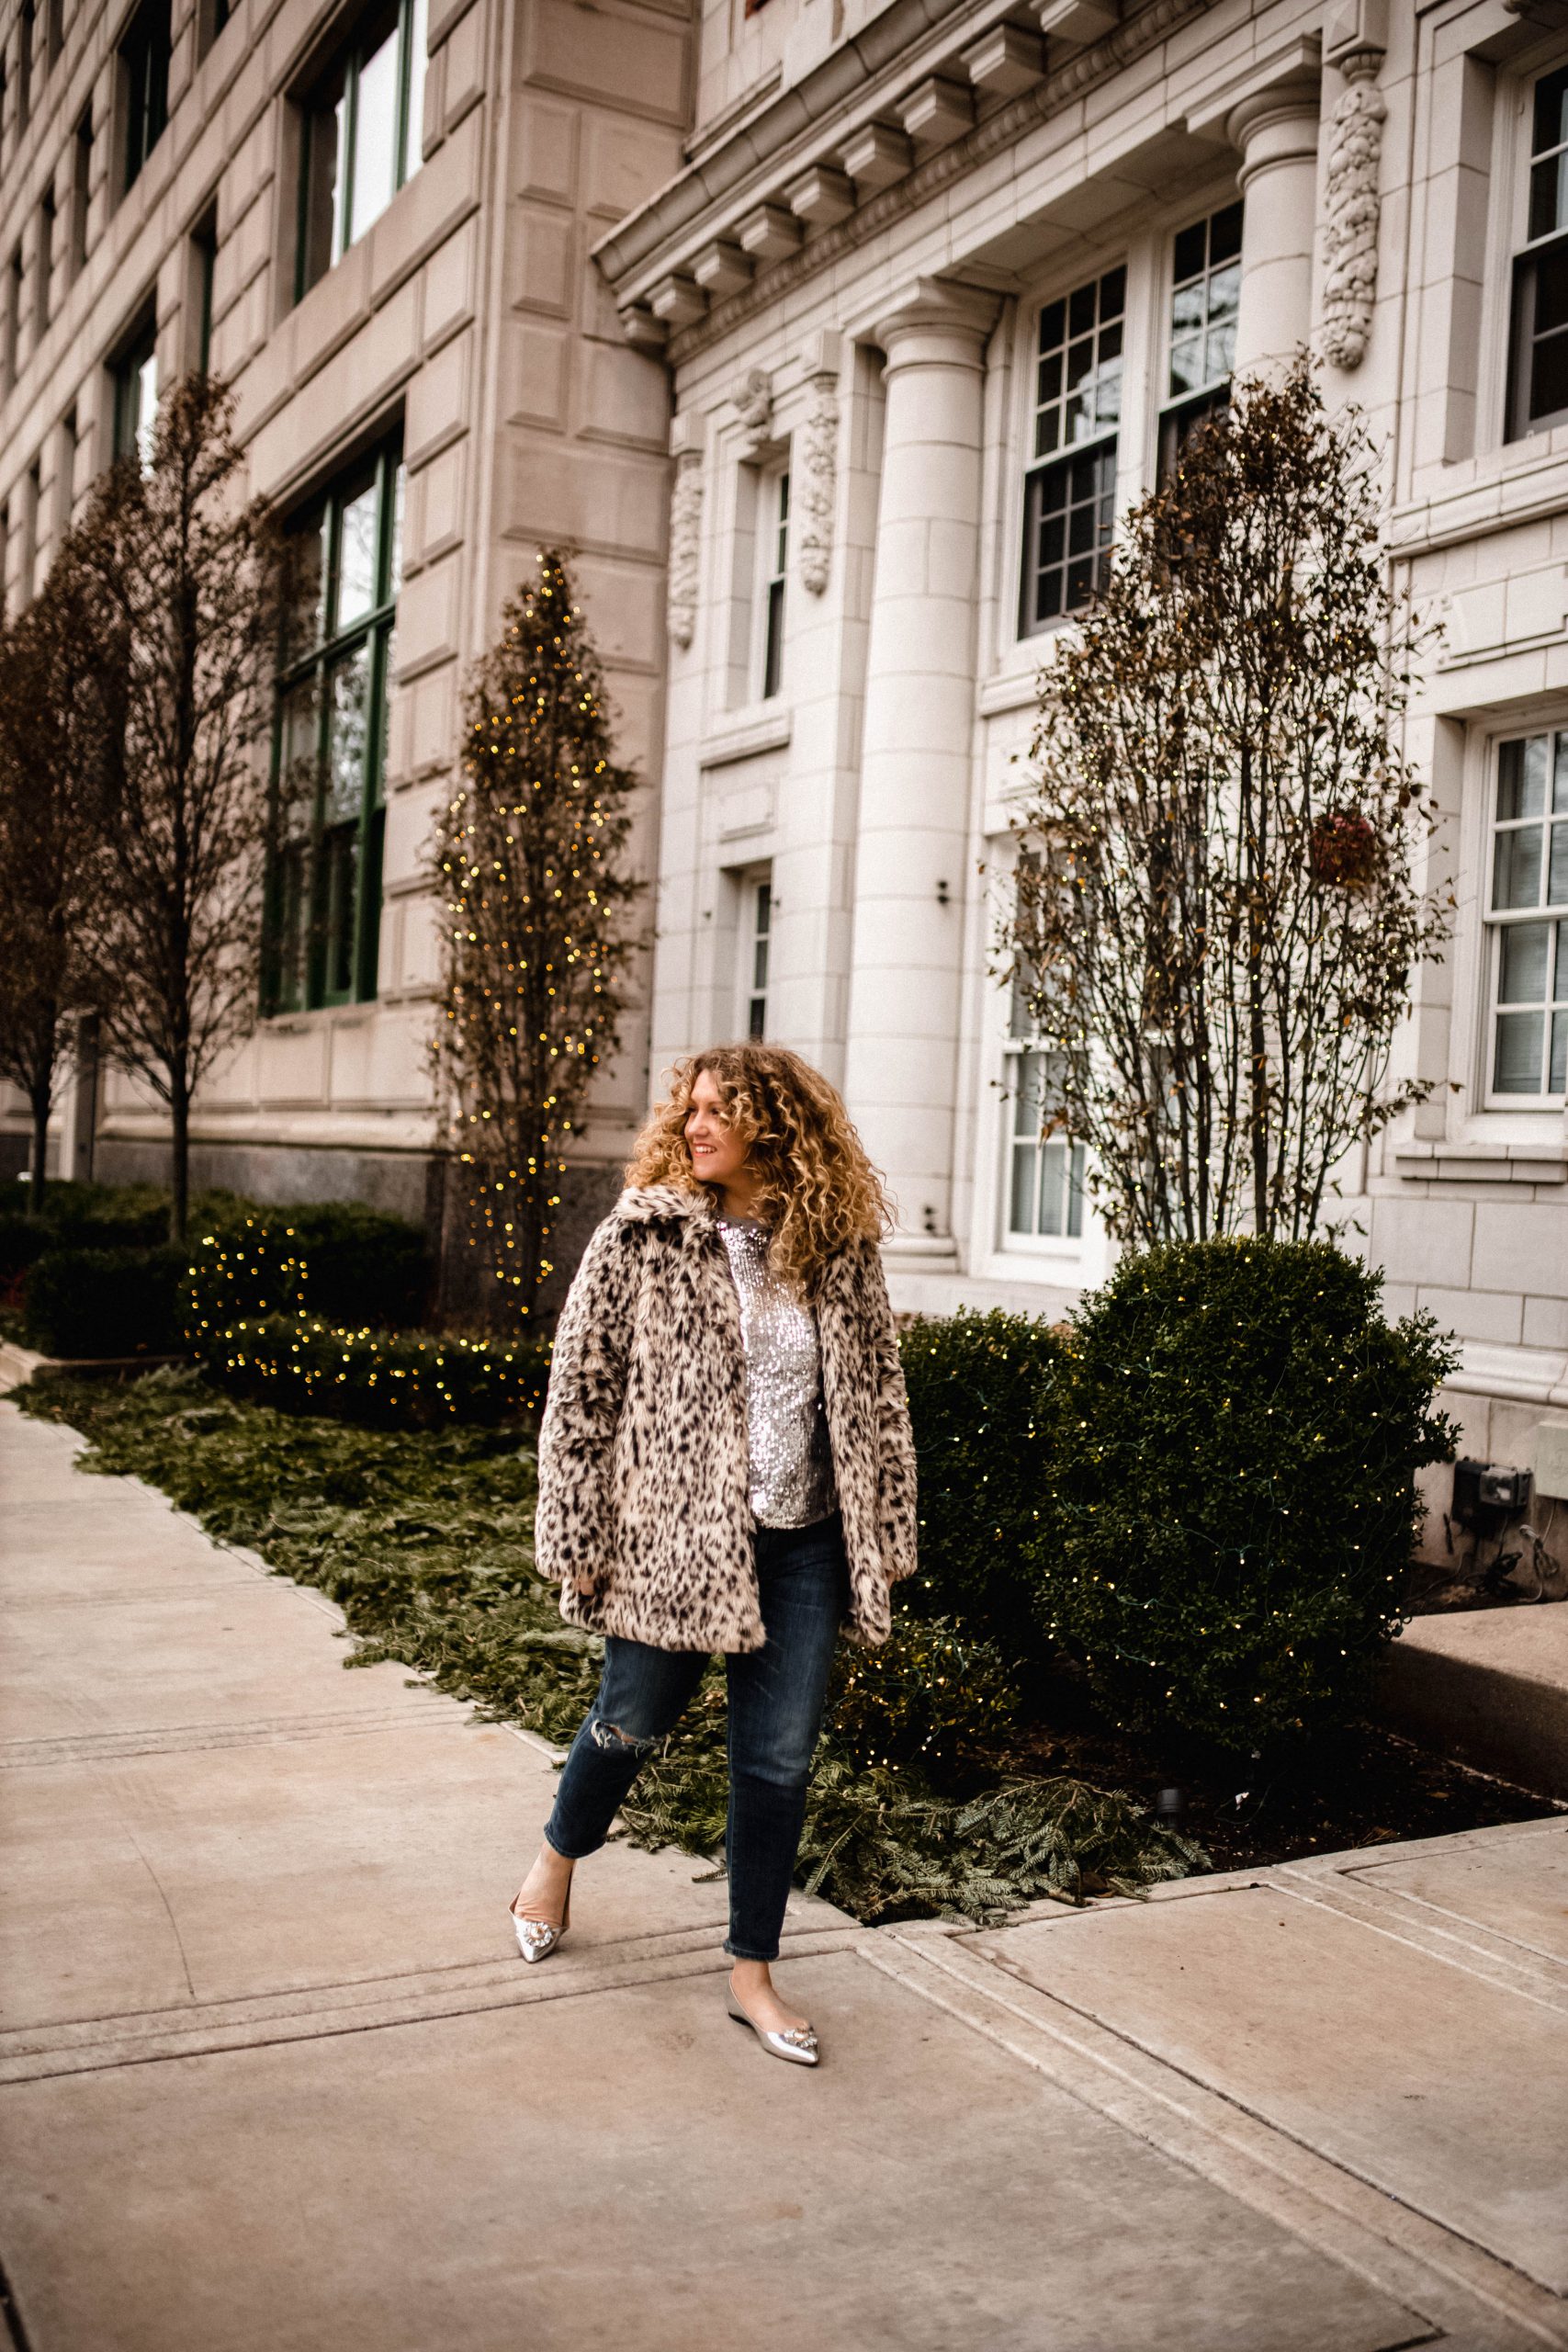 The faux fur jacket from J.crew